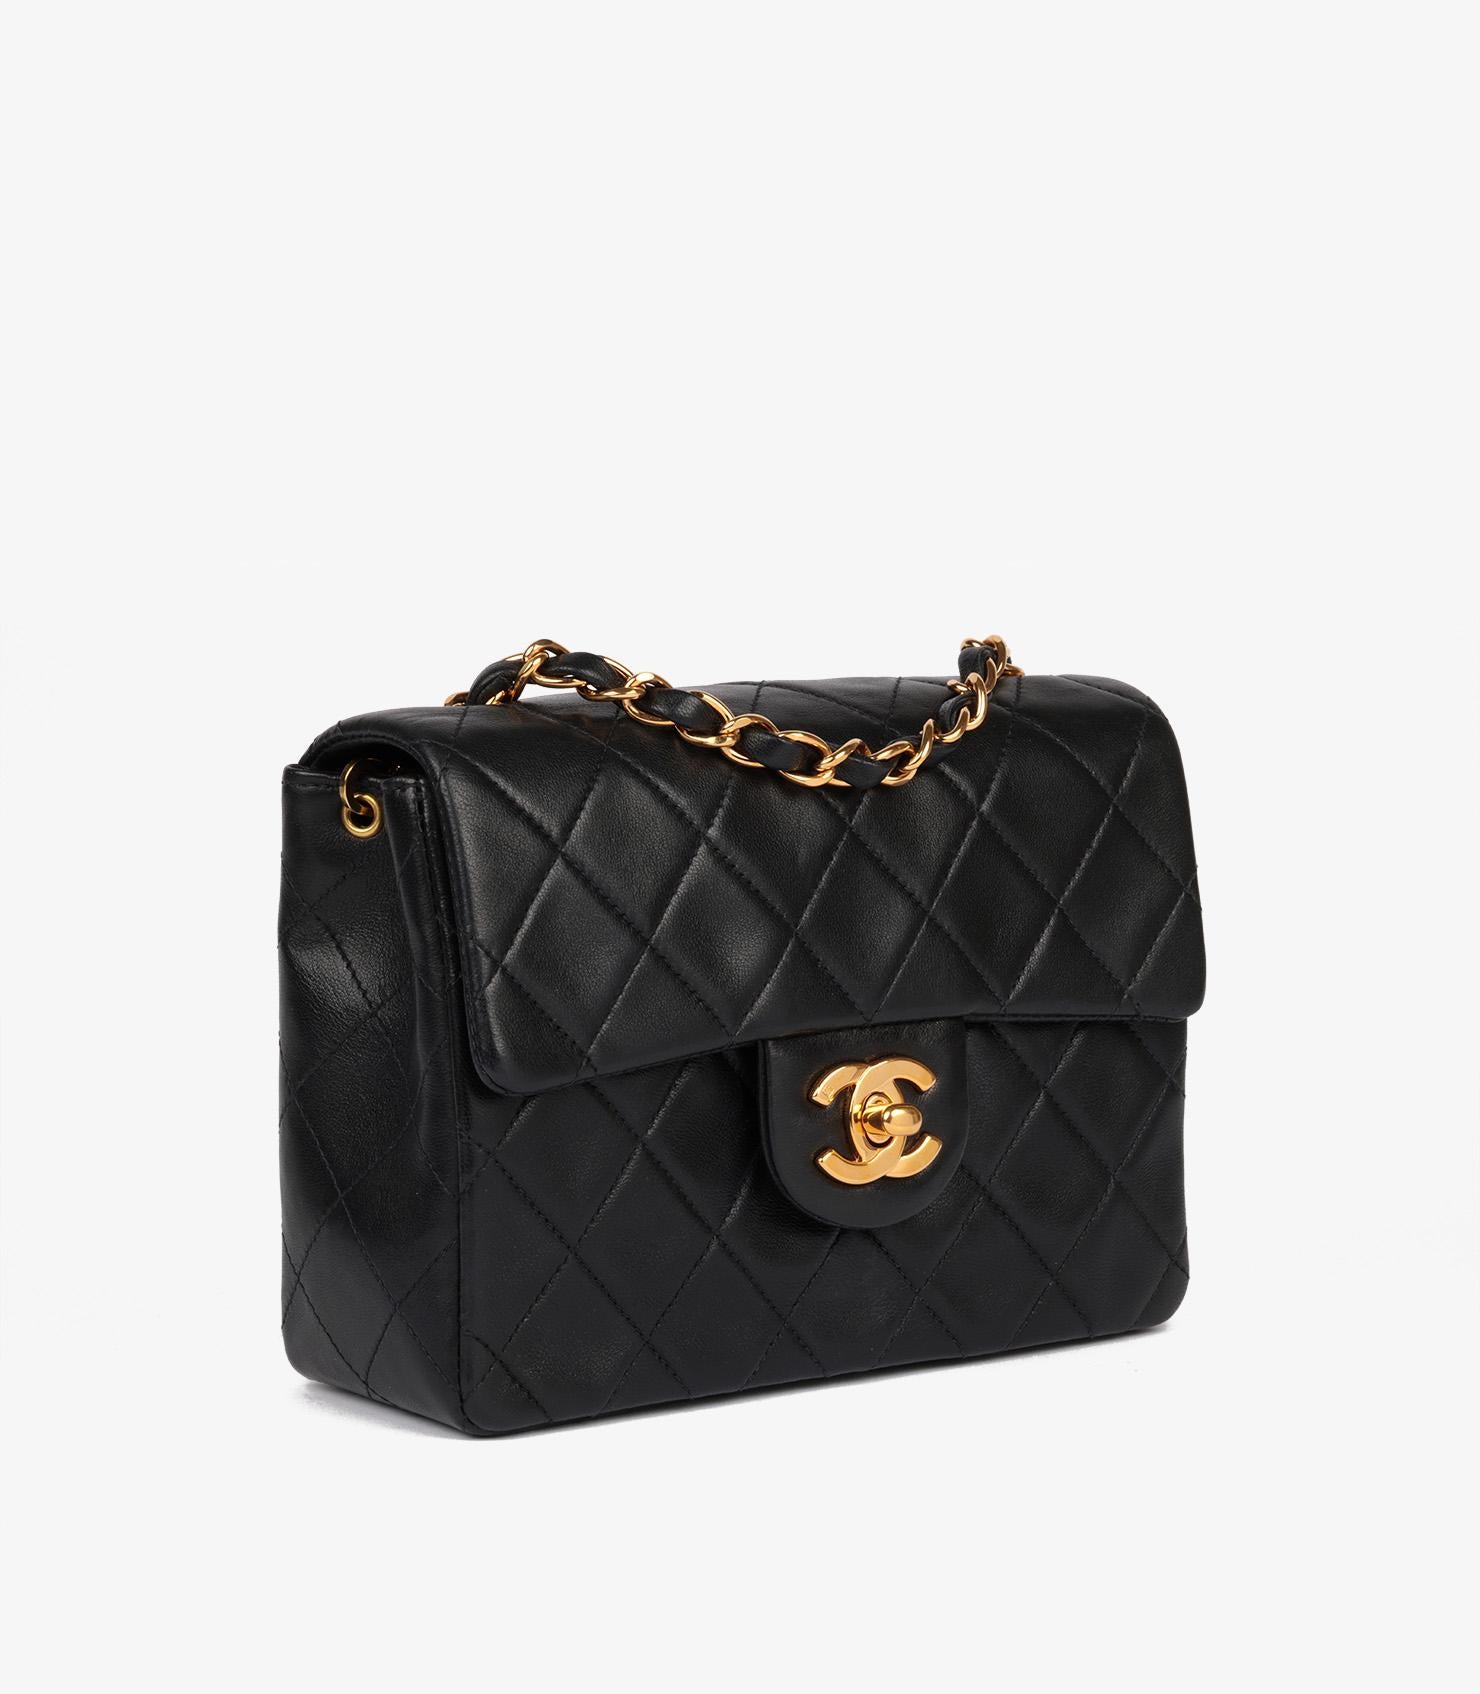 Brand- Chanel
Model- Square Mini Flap Bag
Product Type- Crossbody, Shoulder
Serial Number- 52*****
Age- Circa 1997
Accompanied By- Chanel Dust Bag, Authenticity Card
Colour- Black
Hardware- Gold (24k Plated)
Material(s)- Lambskin